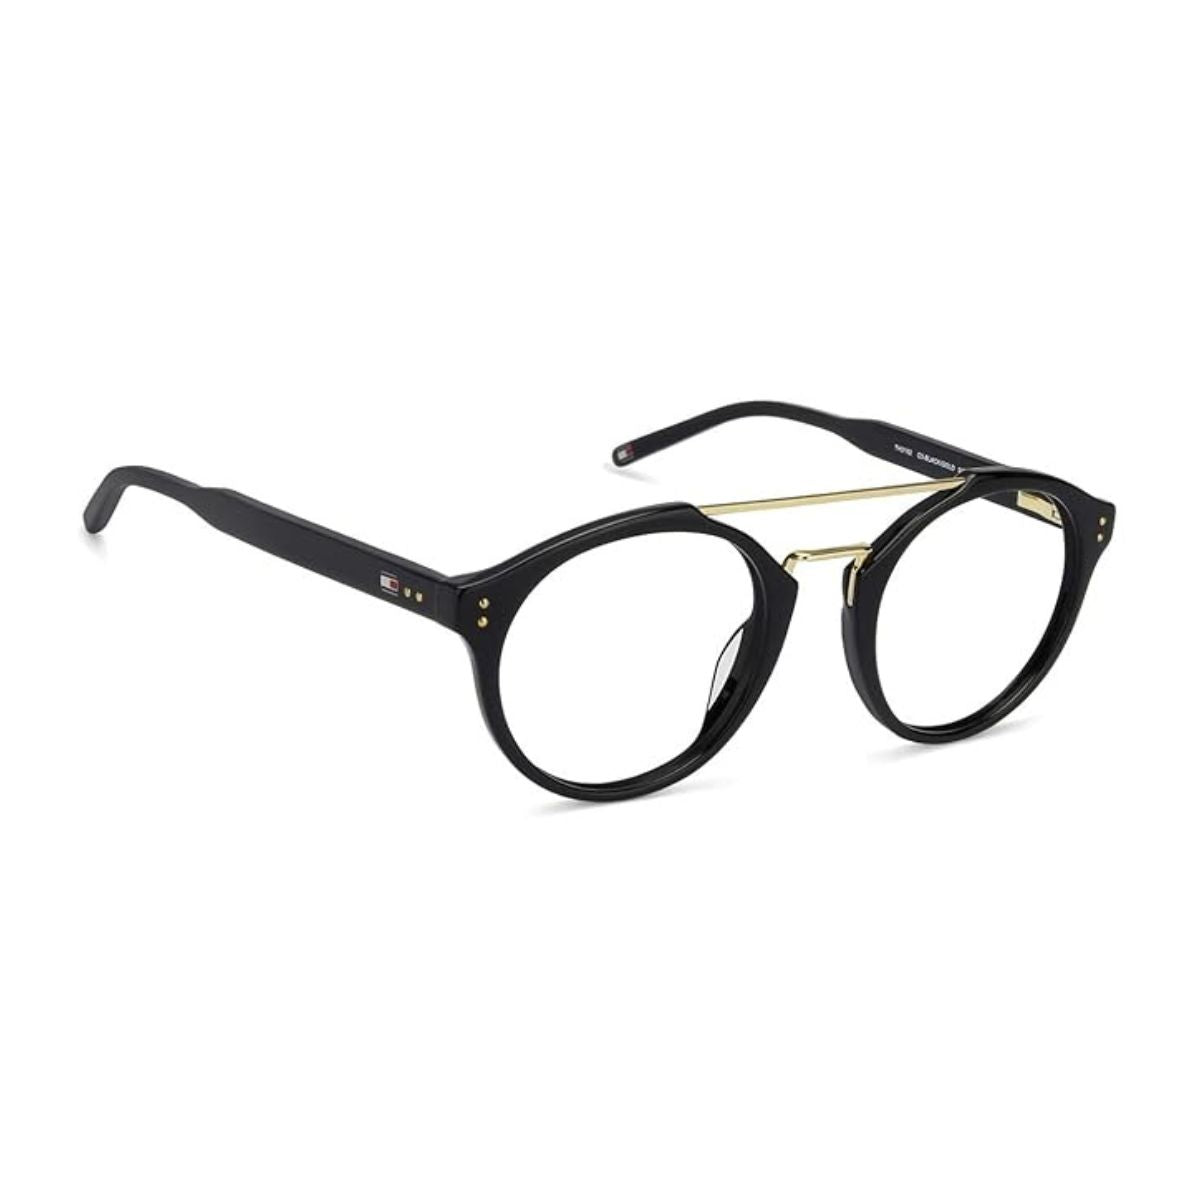 "shop Tommy Hilfiger 6128 C2 spactacle frame for women's at optorium"